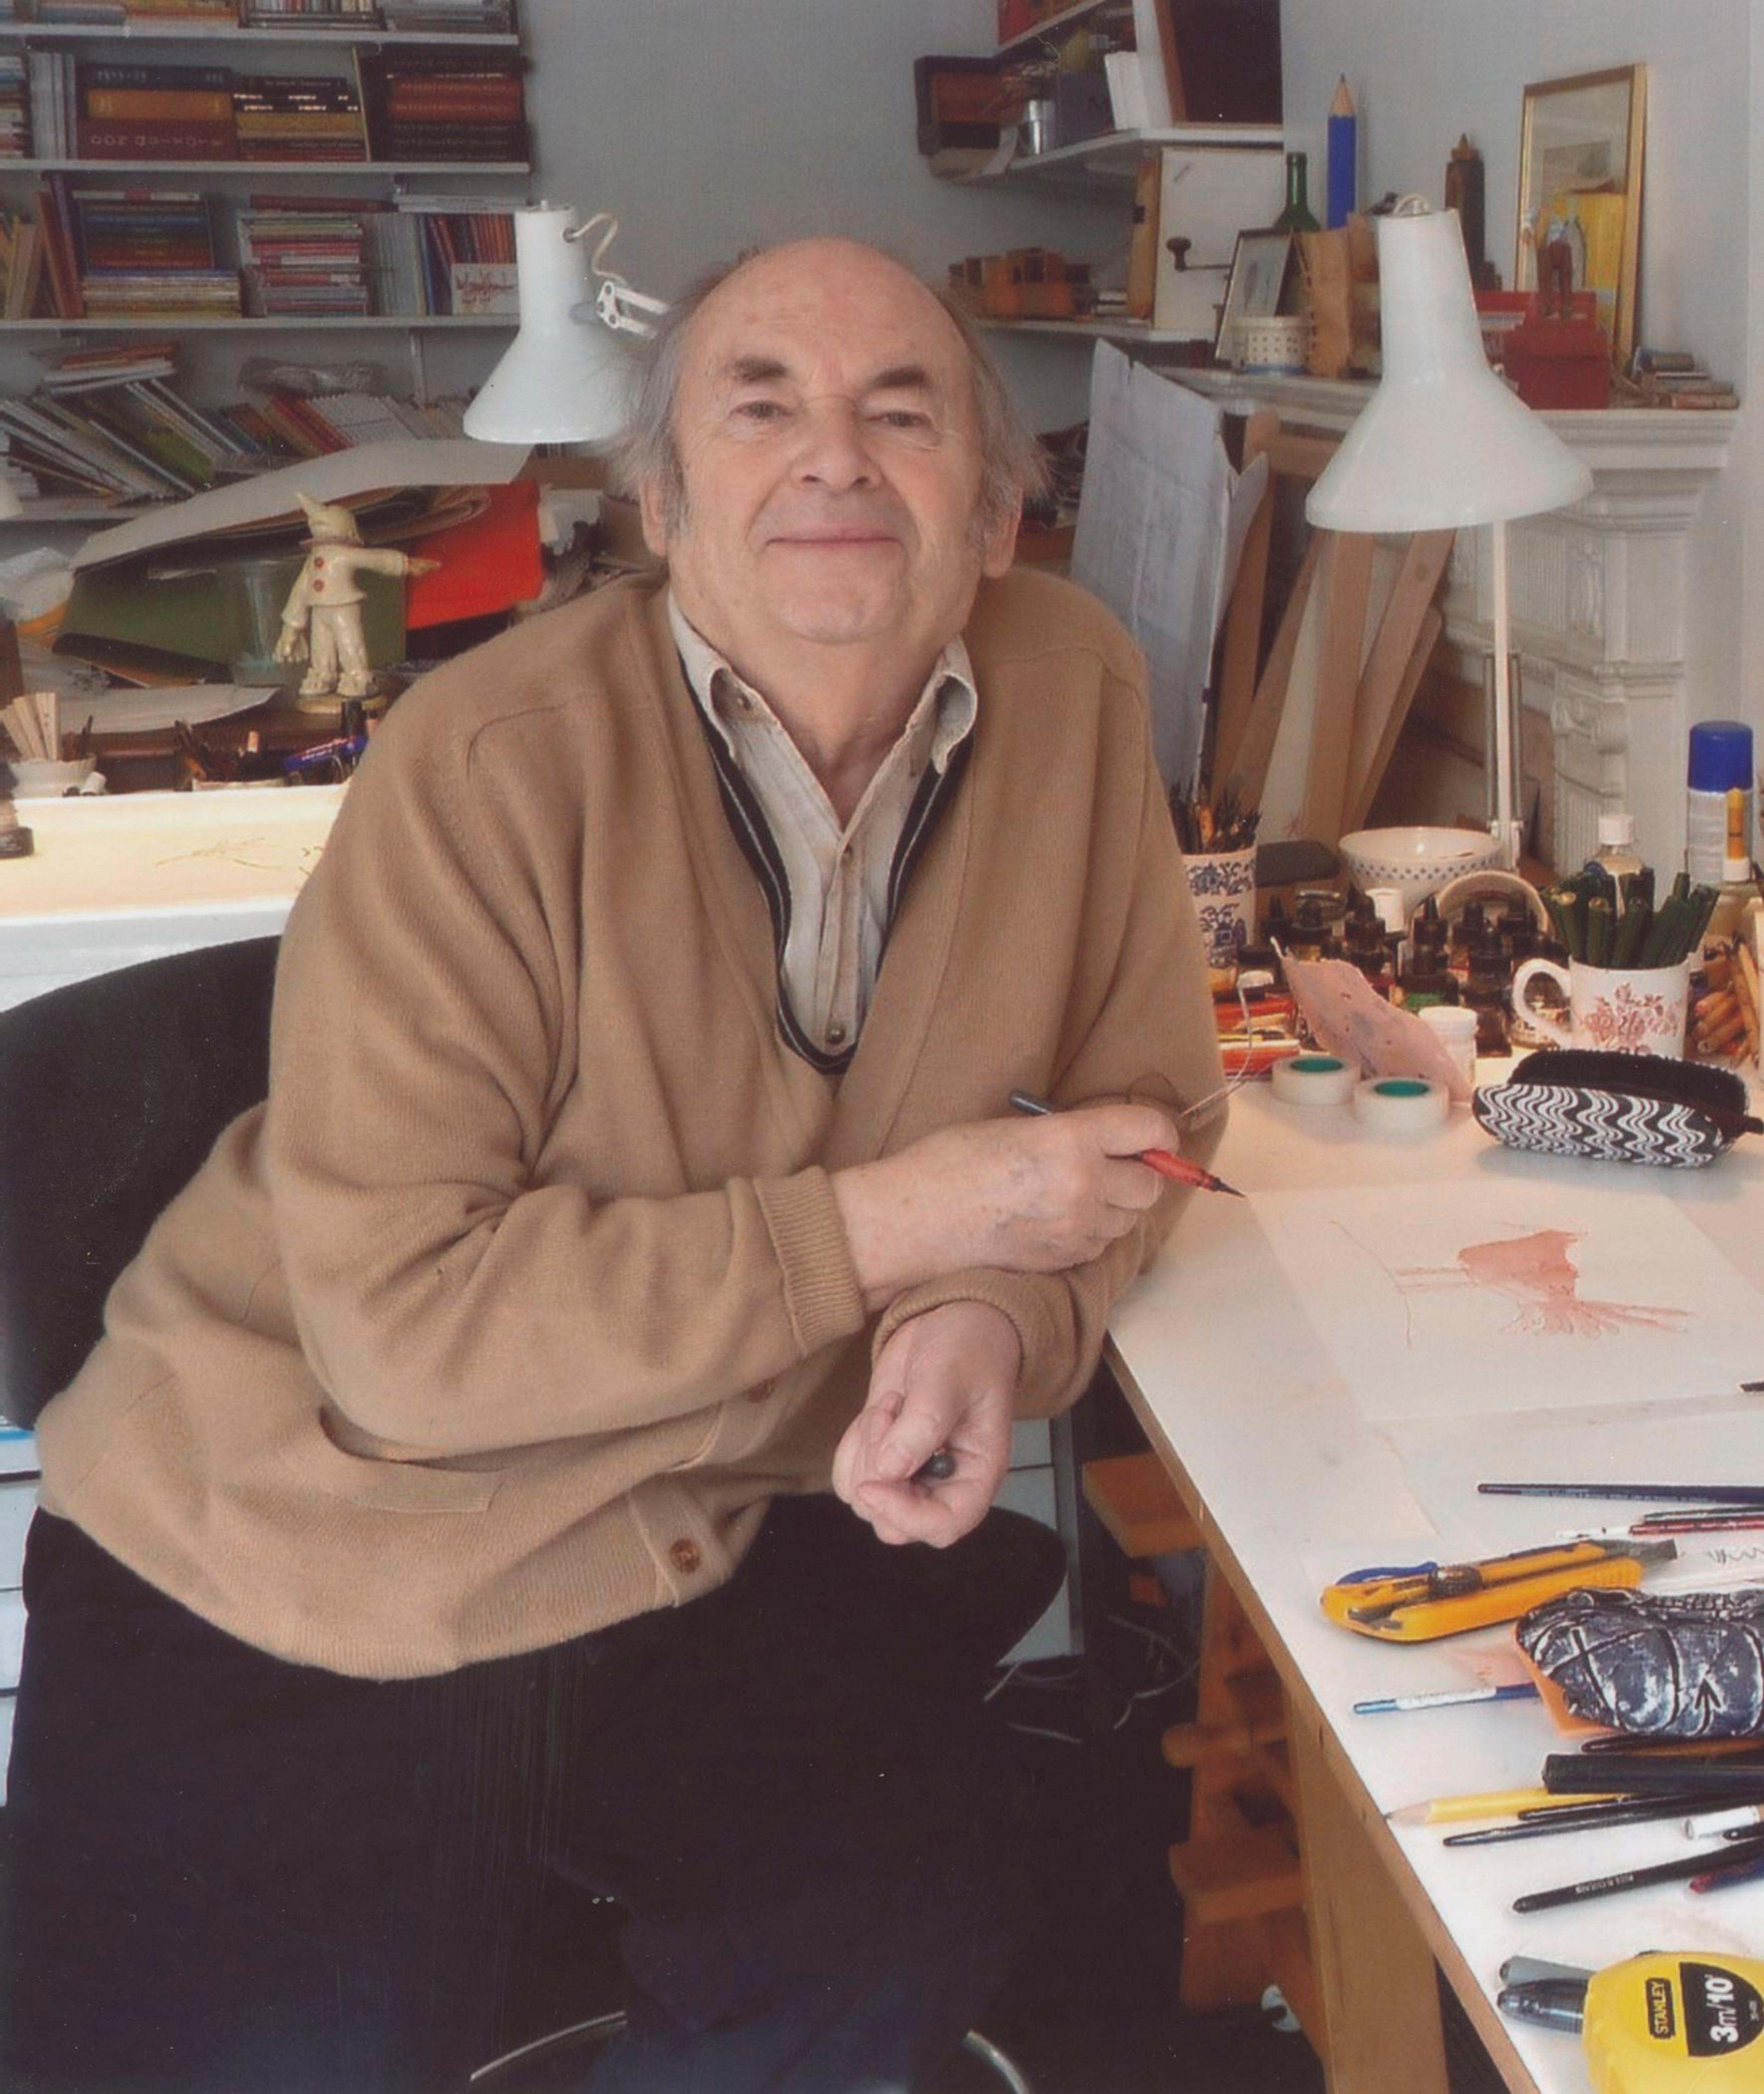 Quentin Blake sits at a desk, facing the camera, with a pen in his hand.